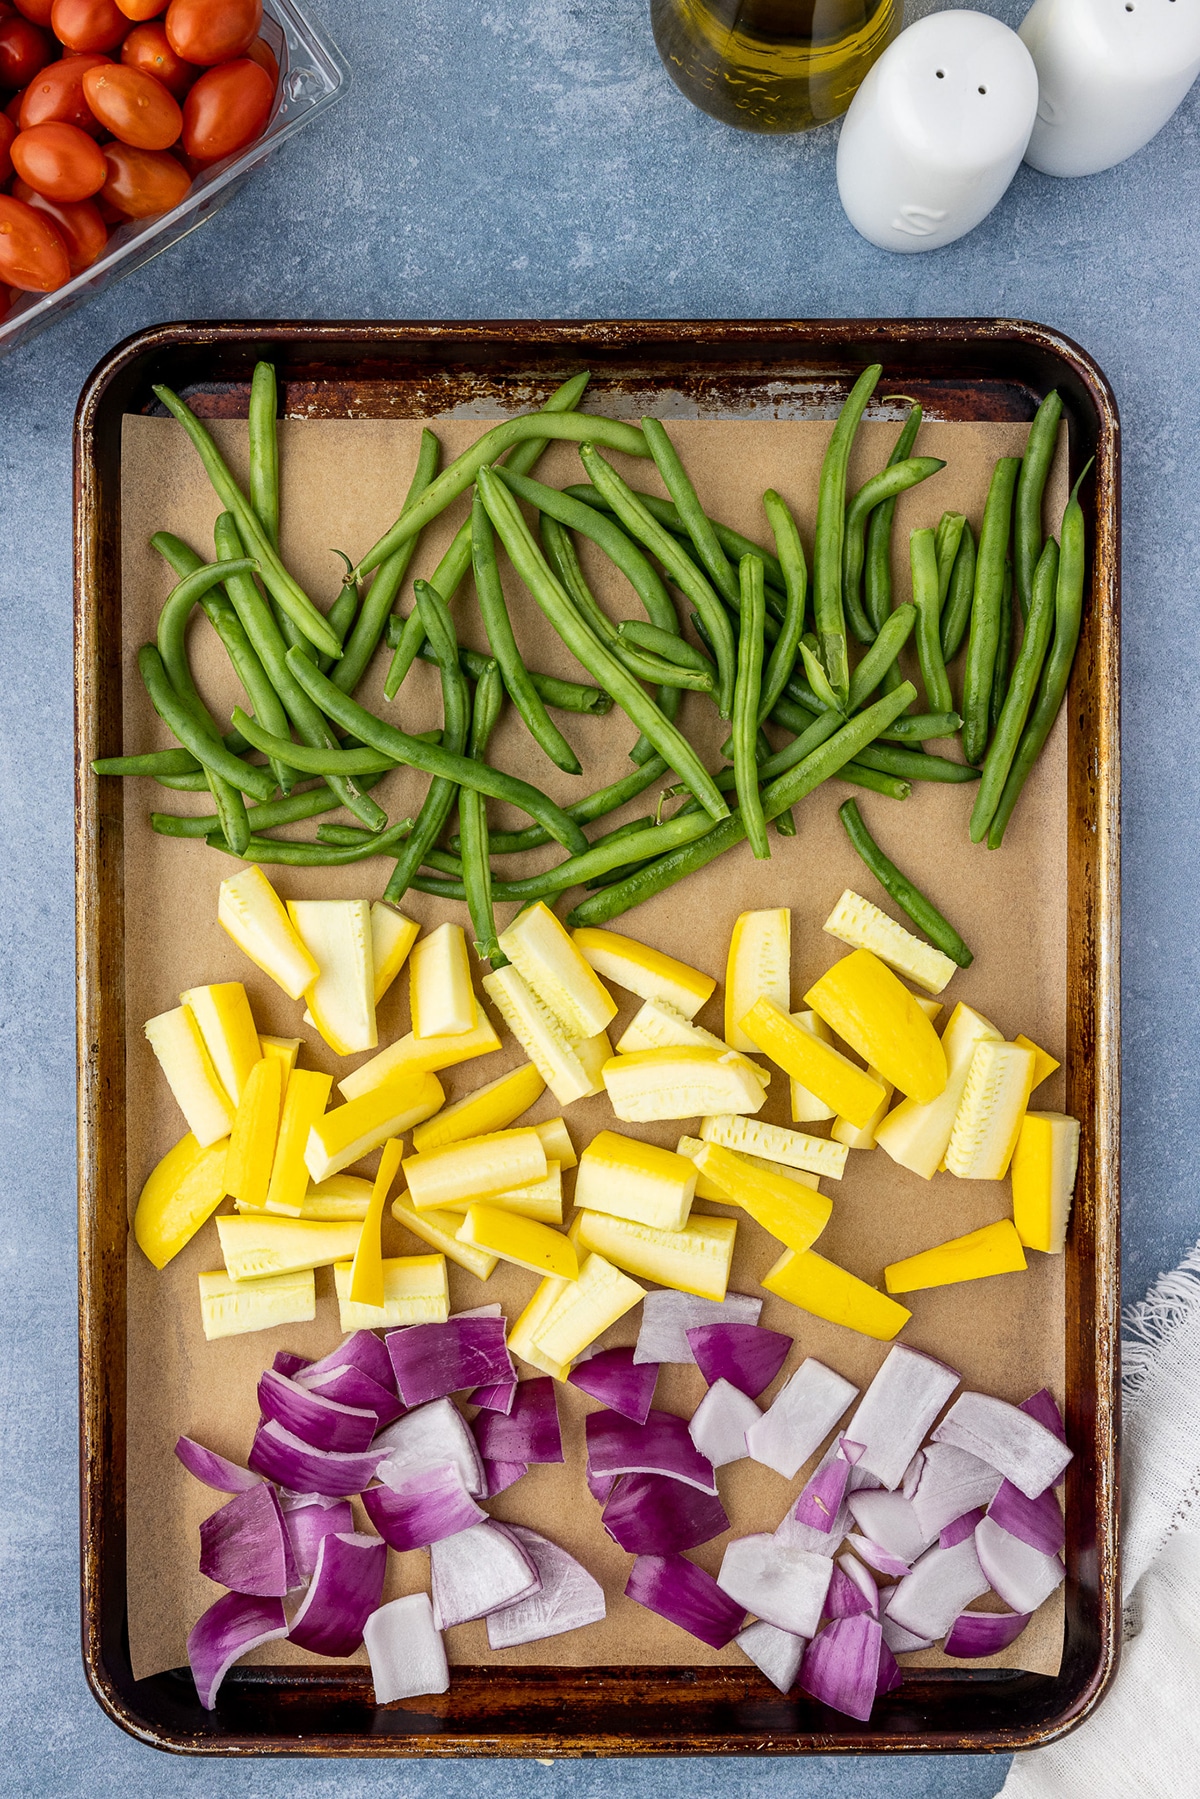 Sheet pan with green beans, yellow squash, and red onions on a blue countertop. 